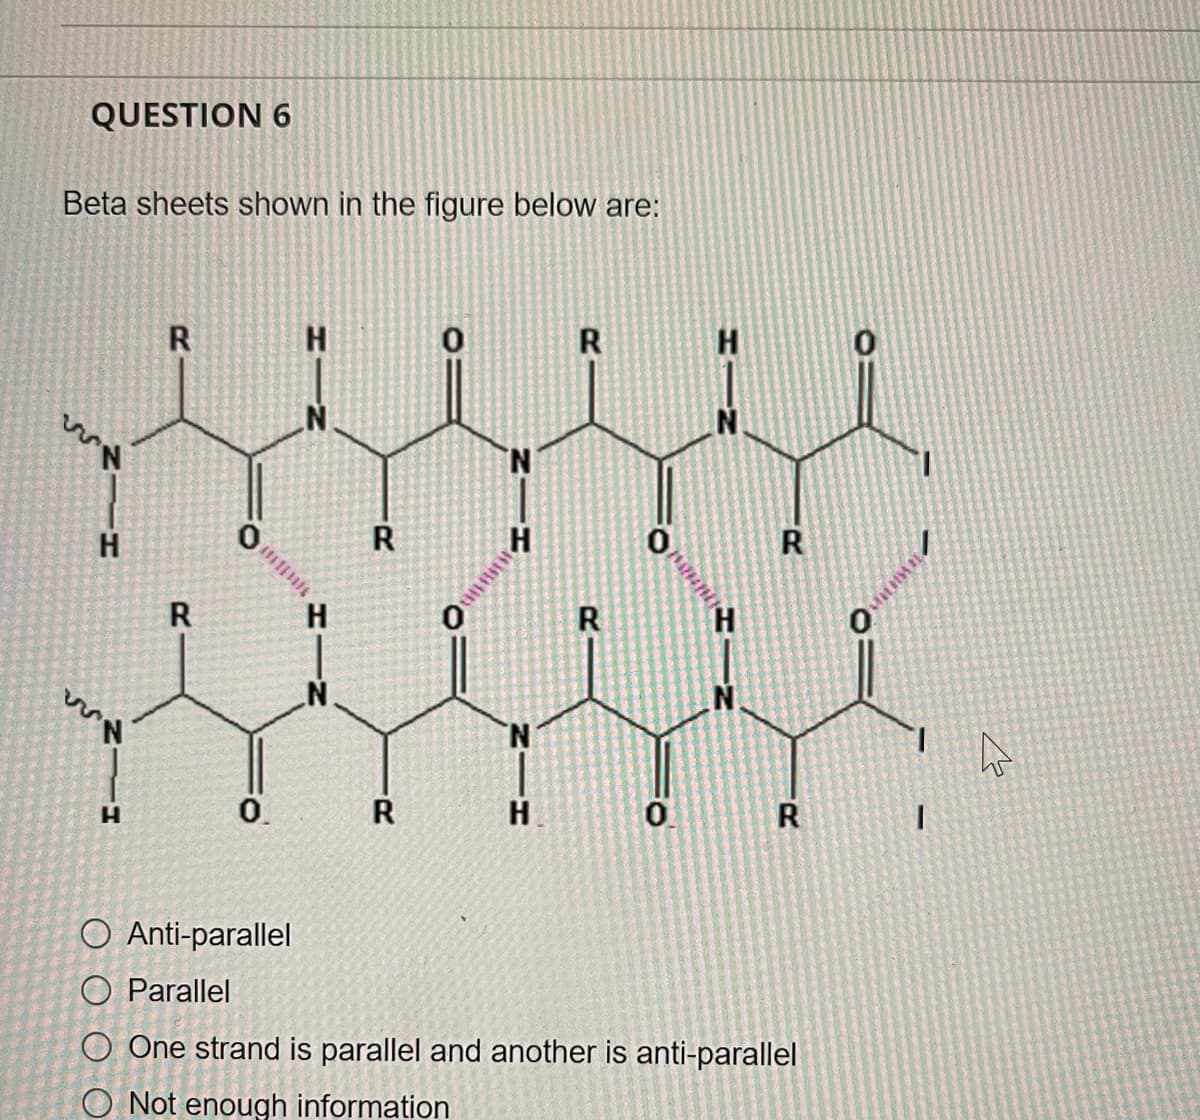 QUESTION 6
Beta sheets shown in the figure below are:
H.
R
N.
1.
H.
R
R
H
N.
H
0.
R
H.
R
O Anti-parallel
O Parallel
O One strand is parallel and another is anti-parallel
O Not enough information
HIN
